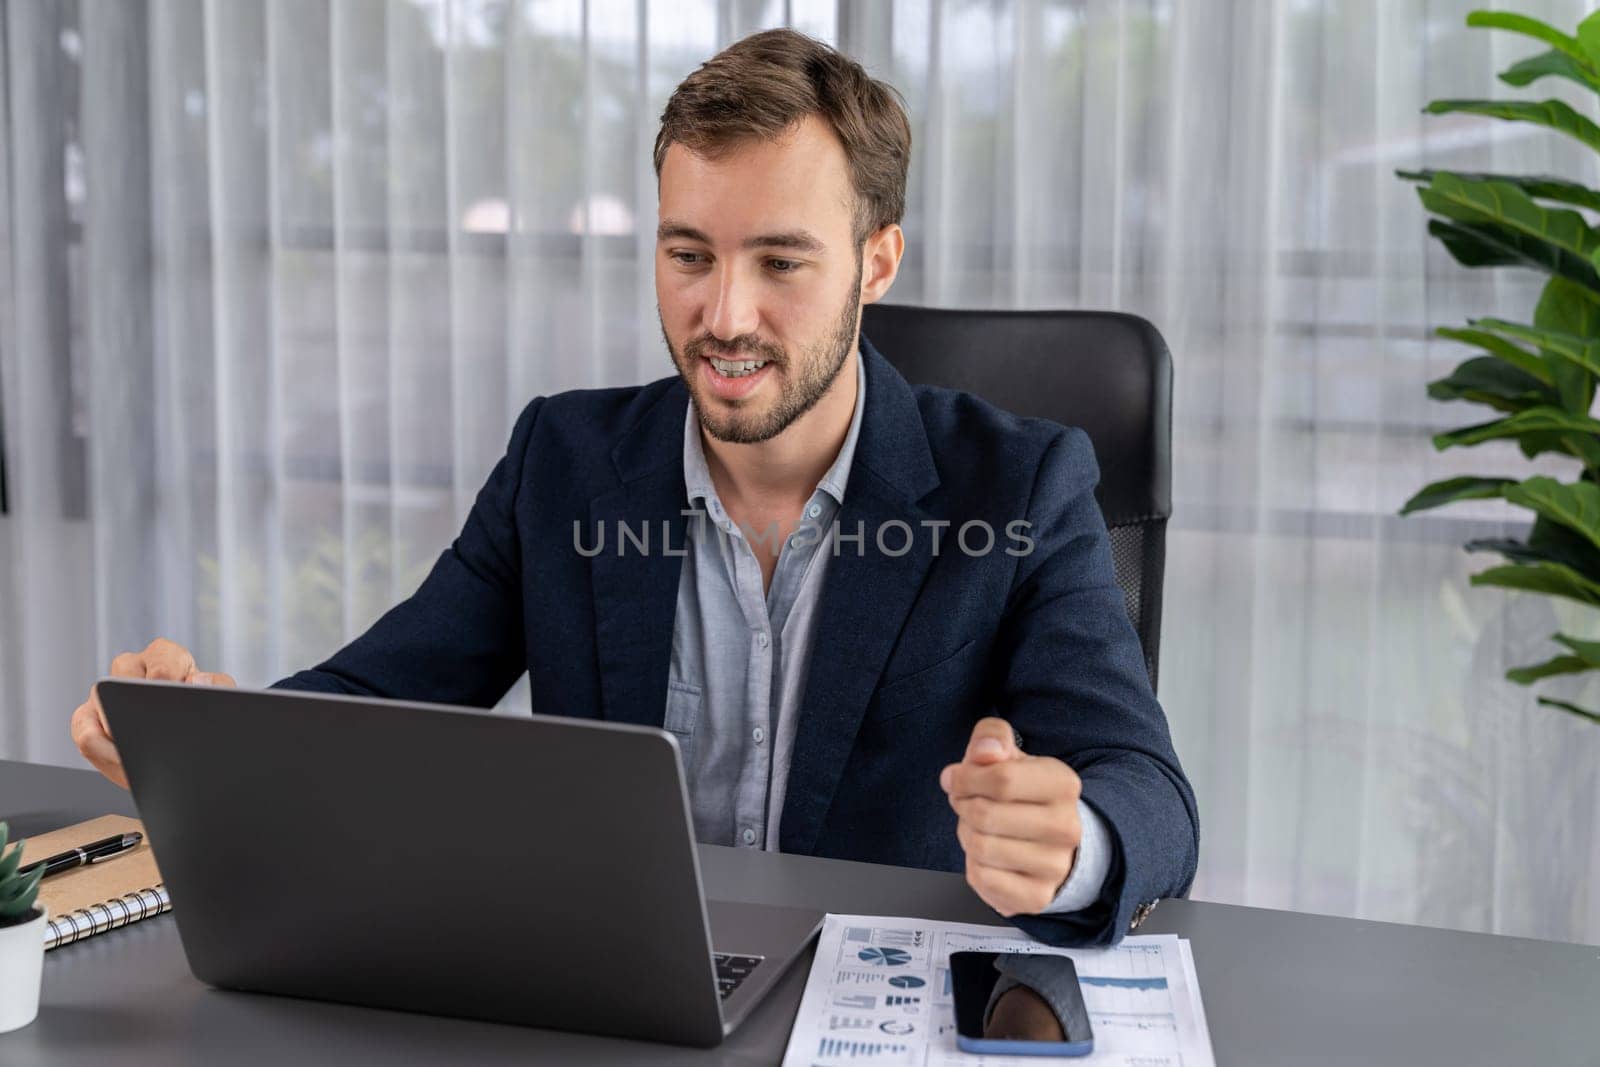 Businessman holds virtual office meeting from office desk, discussing with online video conference using webinar application on laptop for distant communication with remote workers. Entity